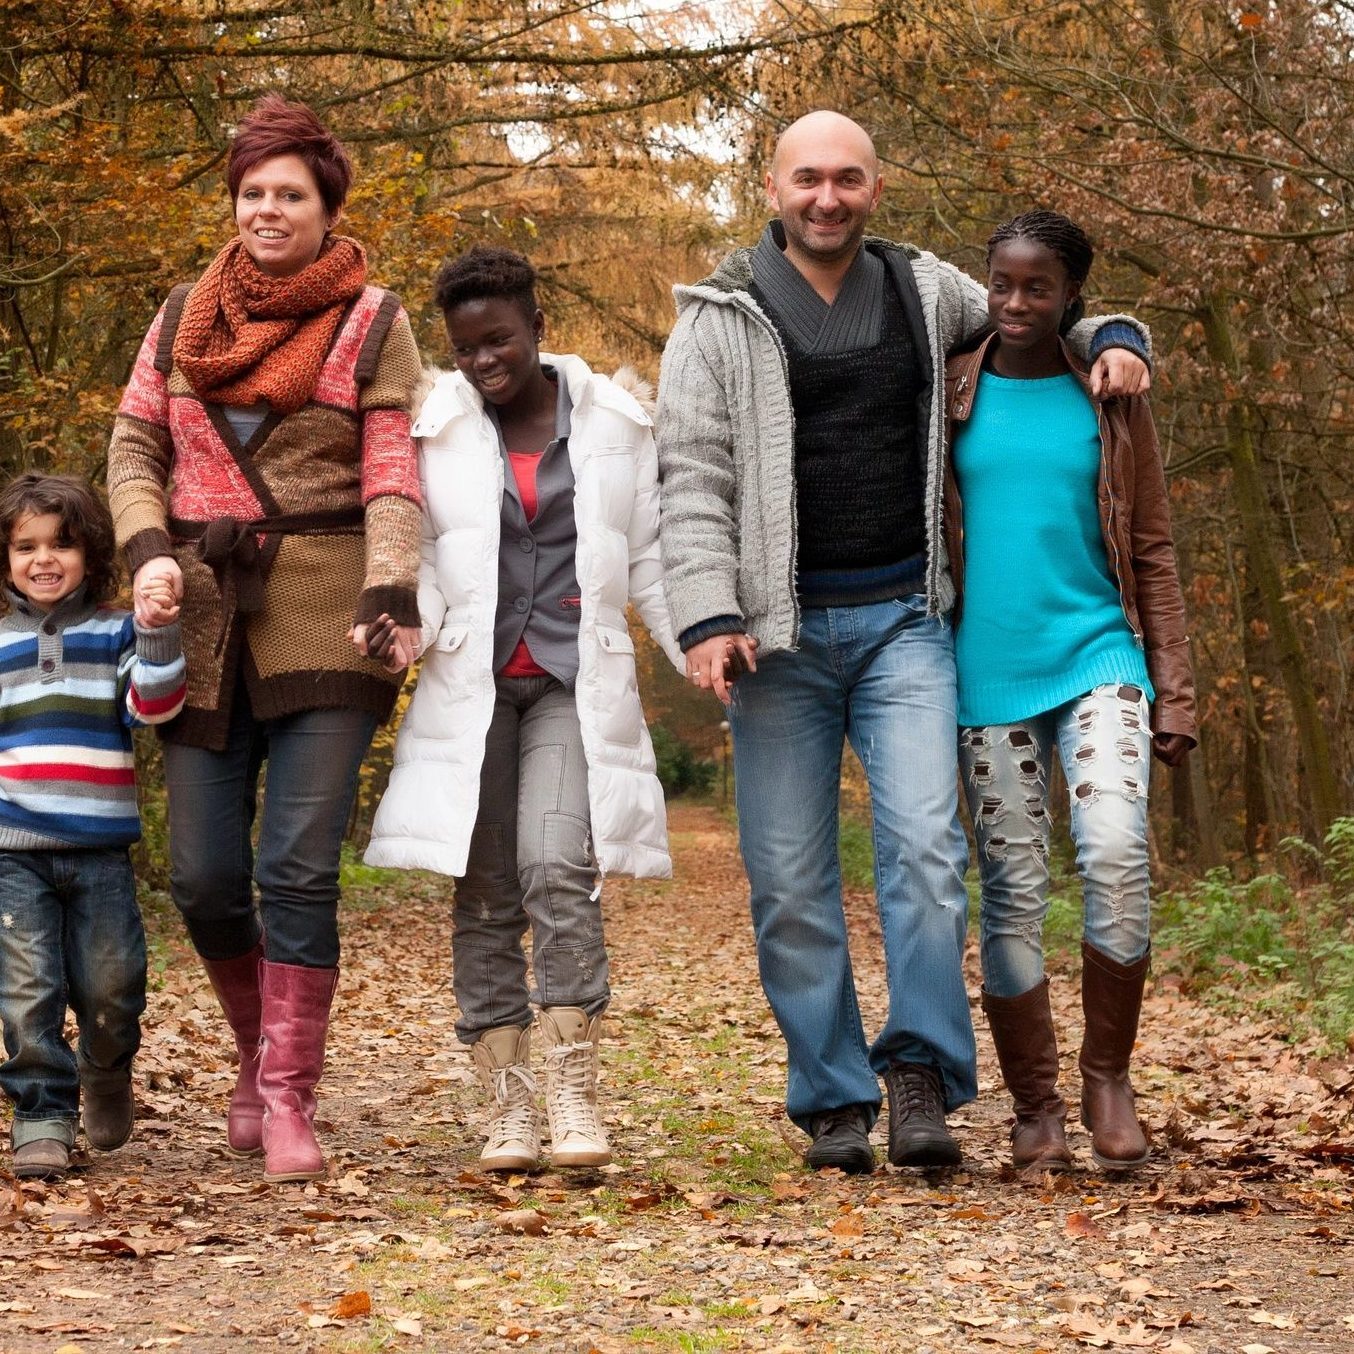 group of people walking on a wooded path